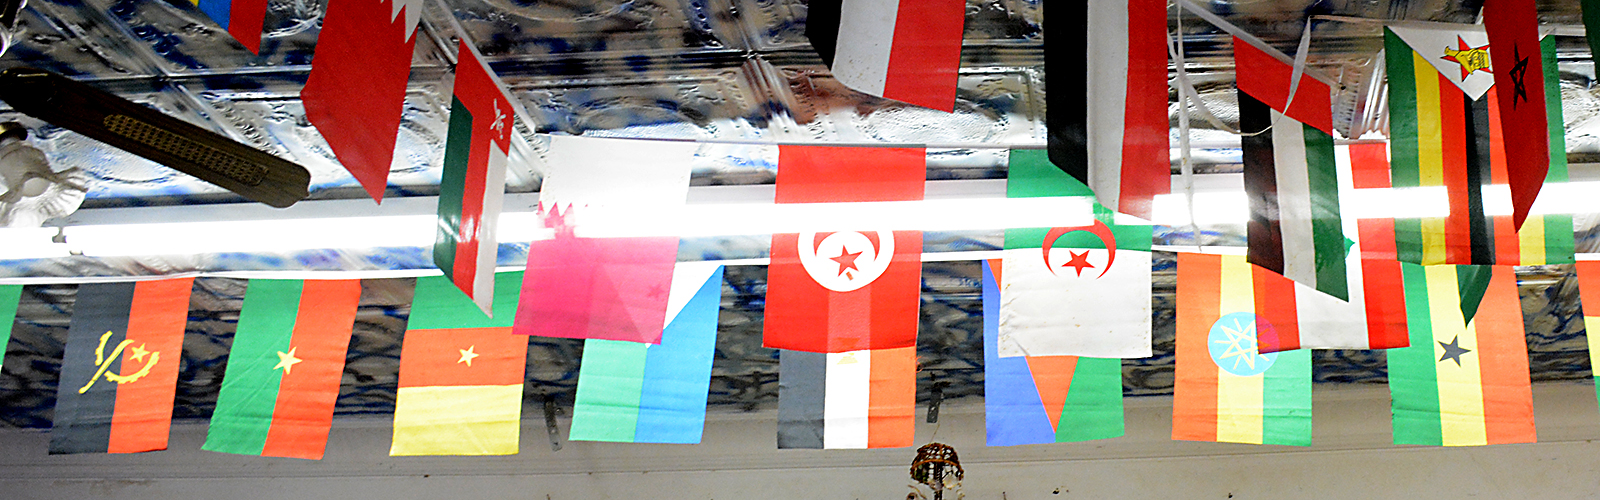 International flags displayed on the ceiling of Yasin Market.